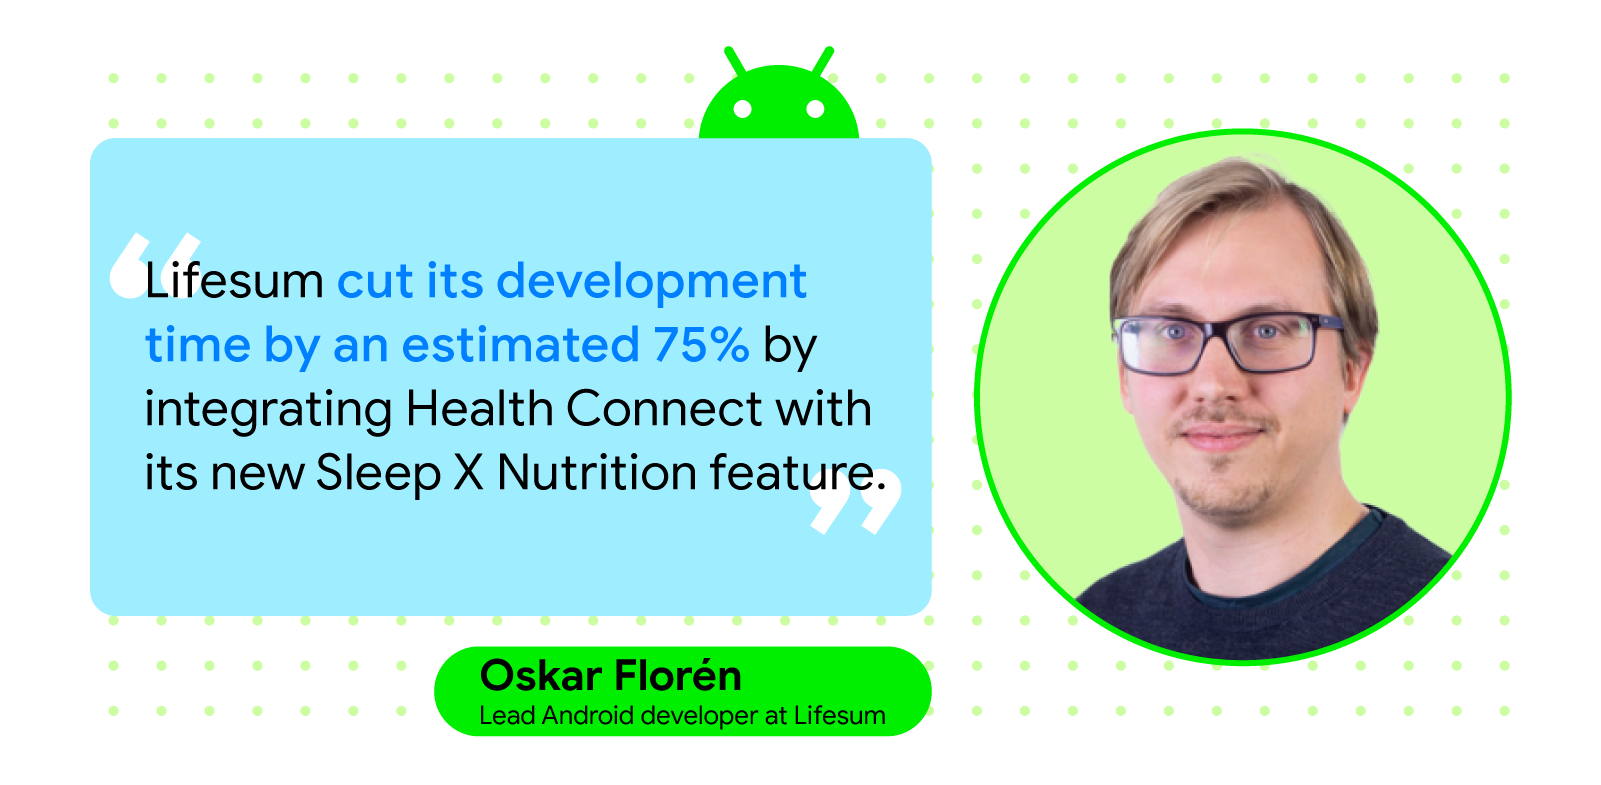 “Lifesum cut its development time by an estimated 75% by integrating Health Connect with its new Sleep X Nutrition feature.” — Oskar Florén, lead Android developer at Lifesum.